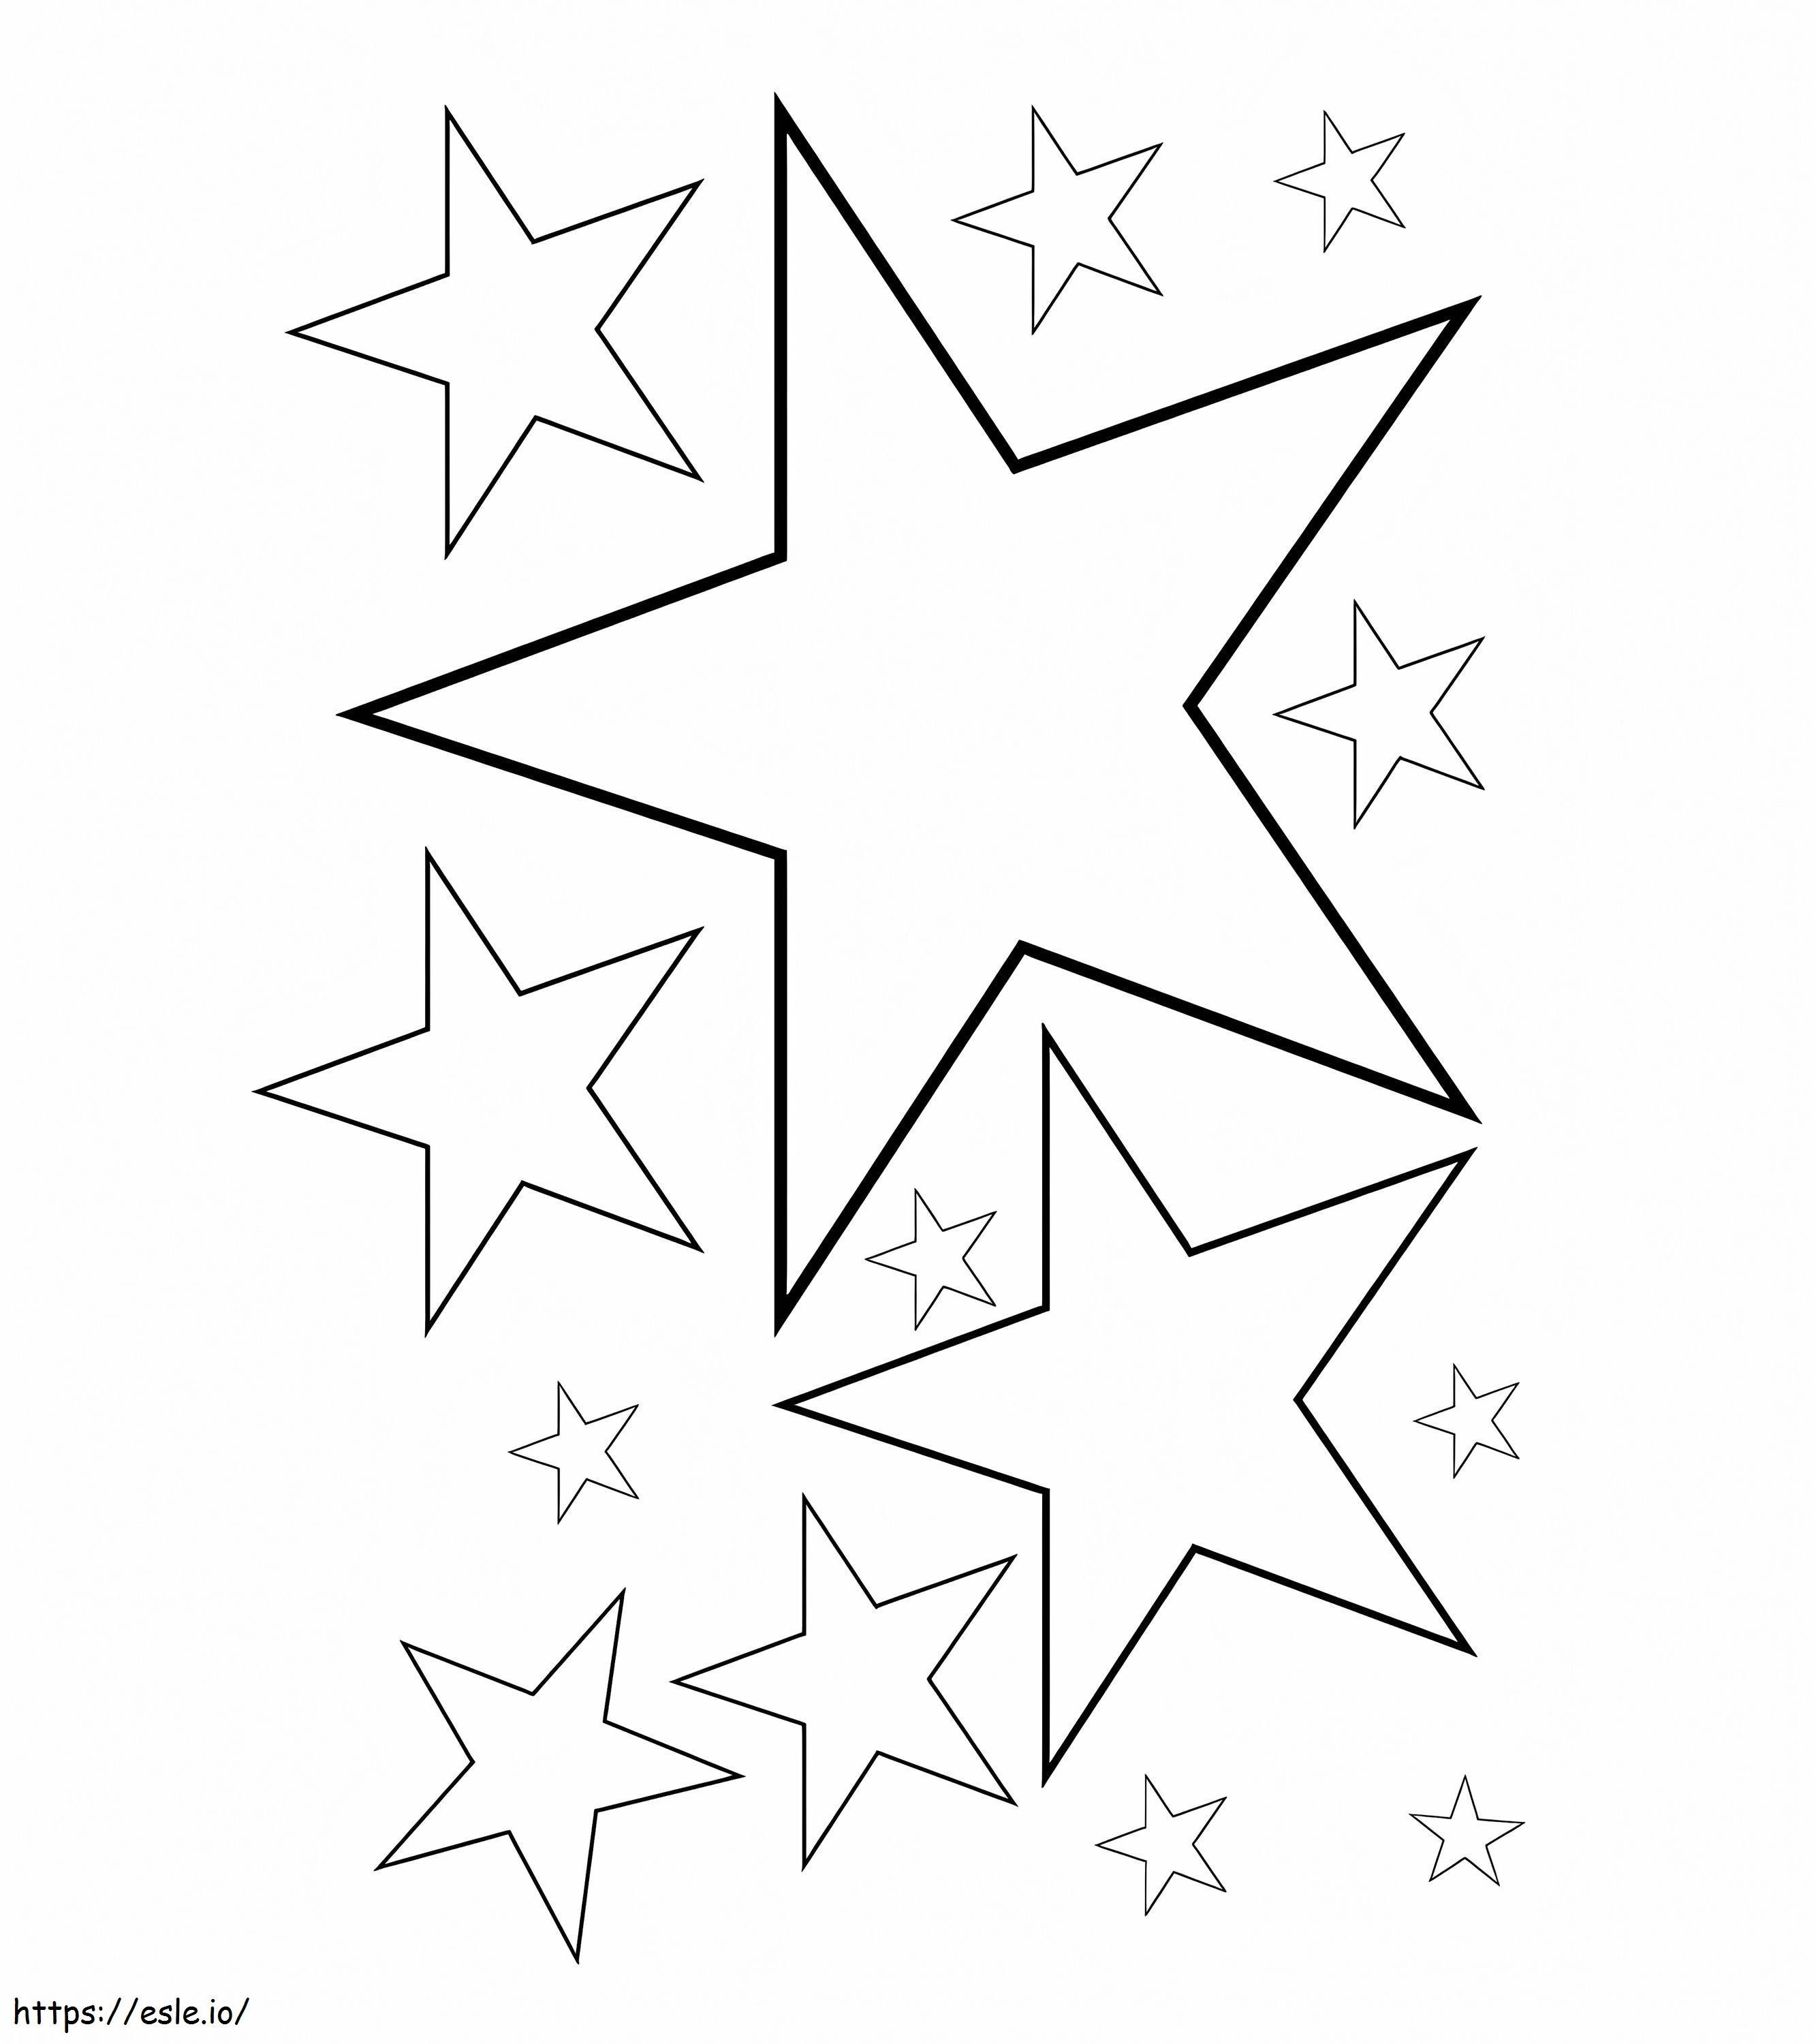 The Stars coloring page